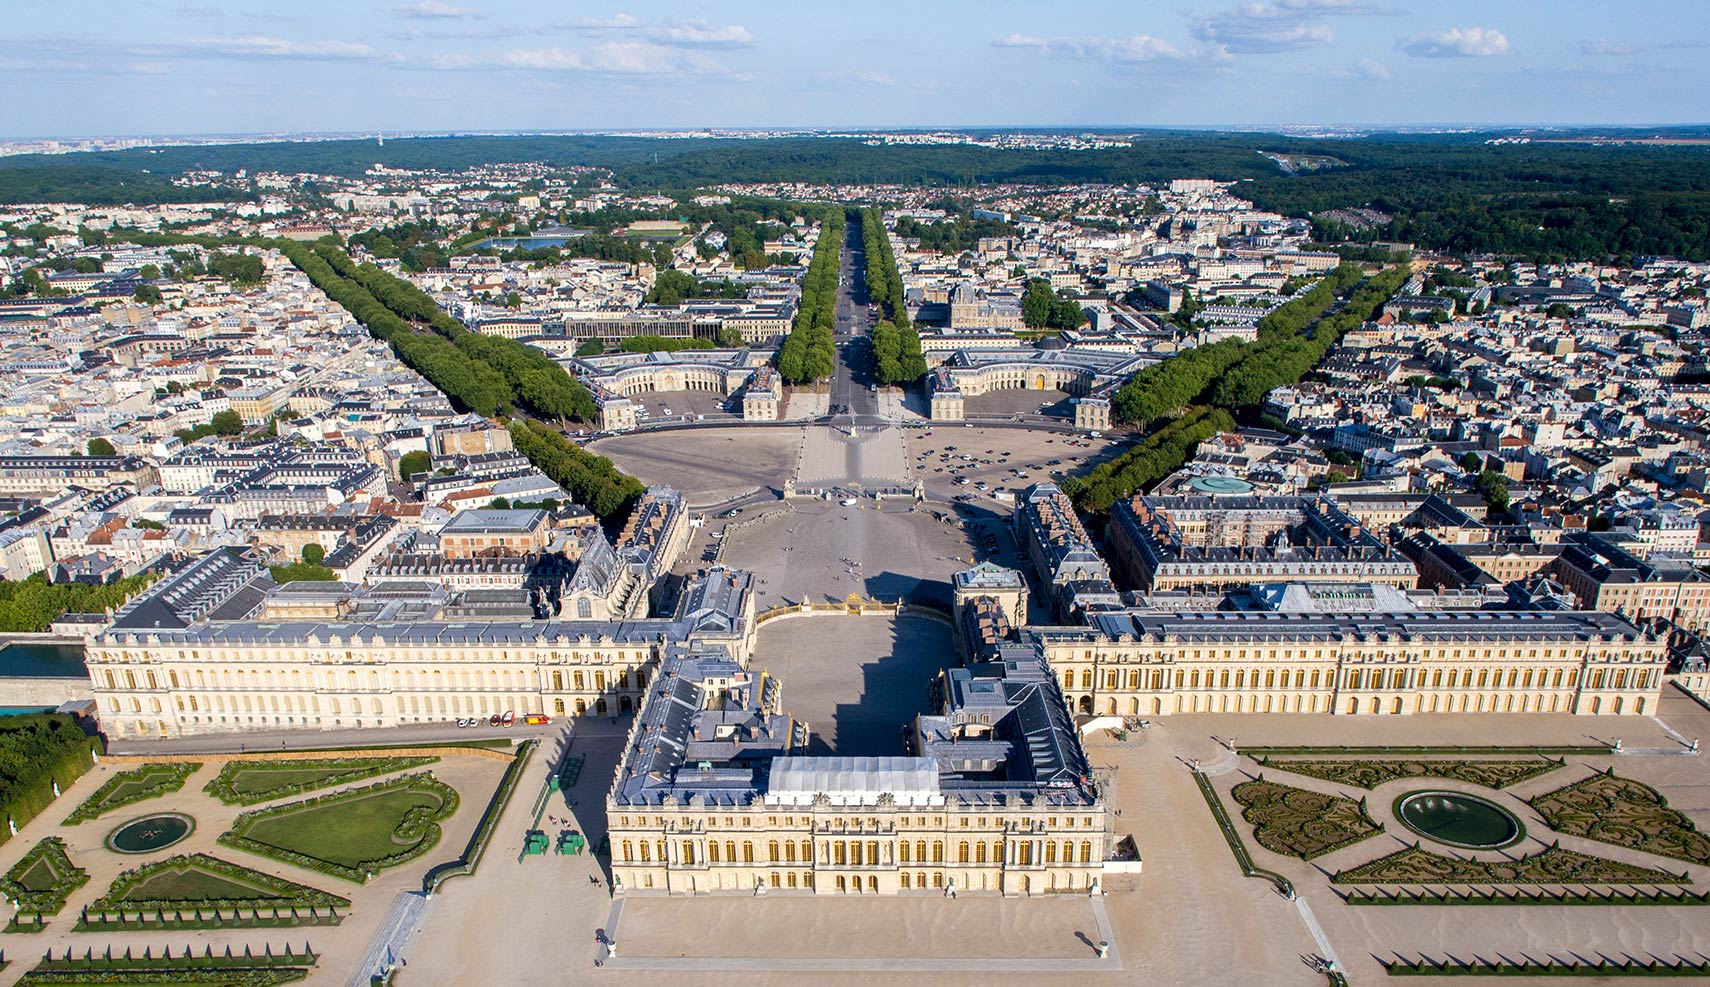 Aerial view of the city and palace of Versailles, France